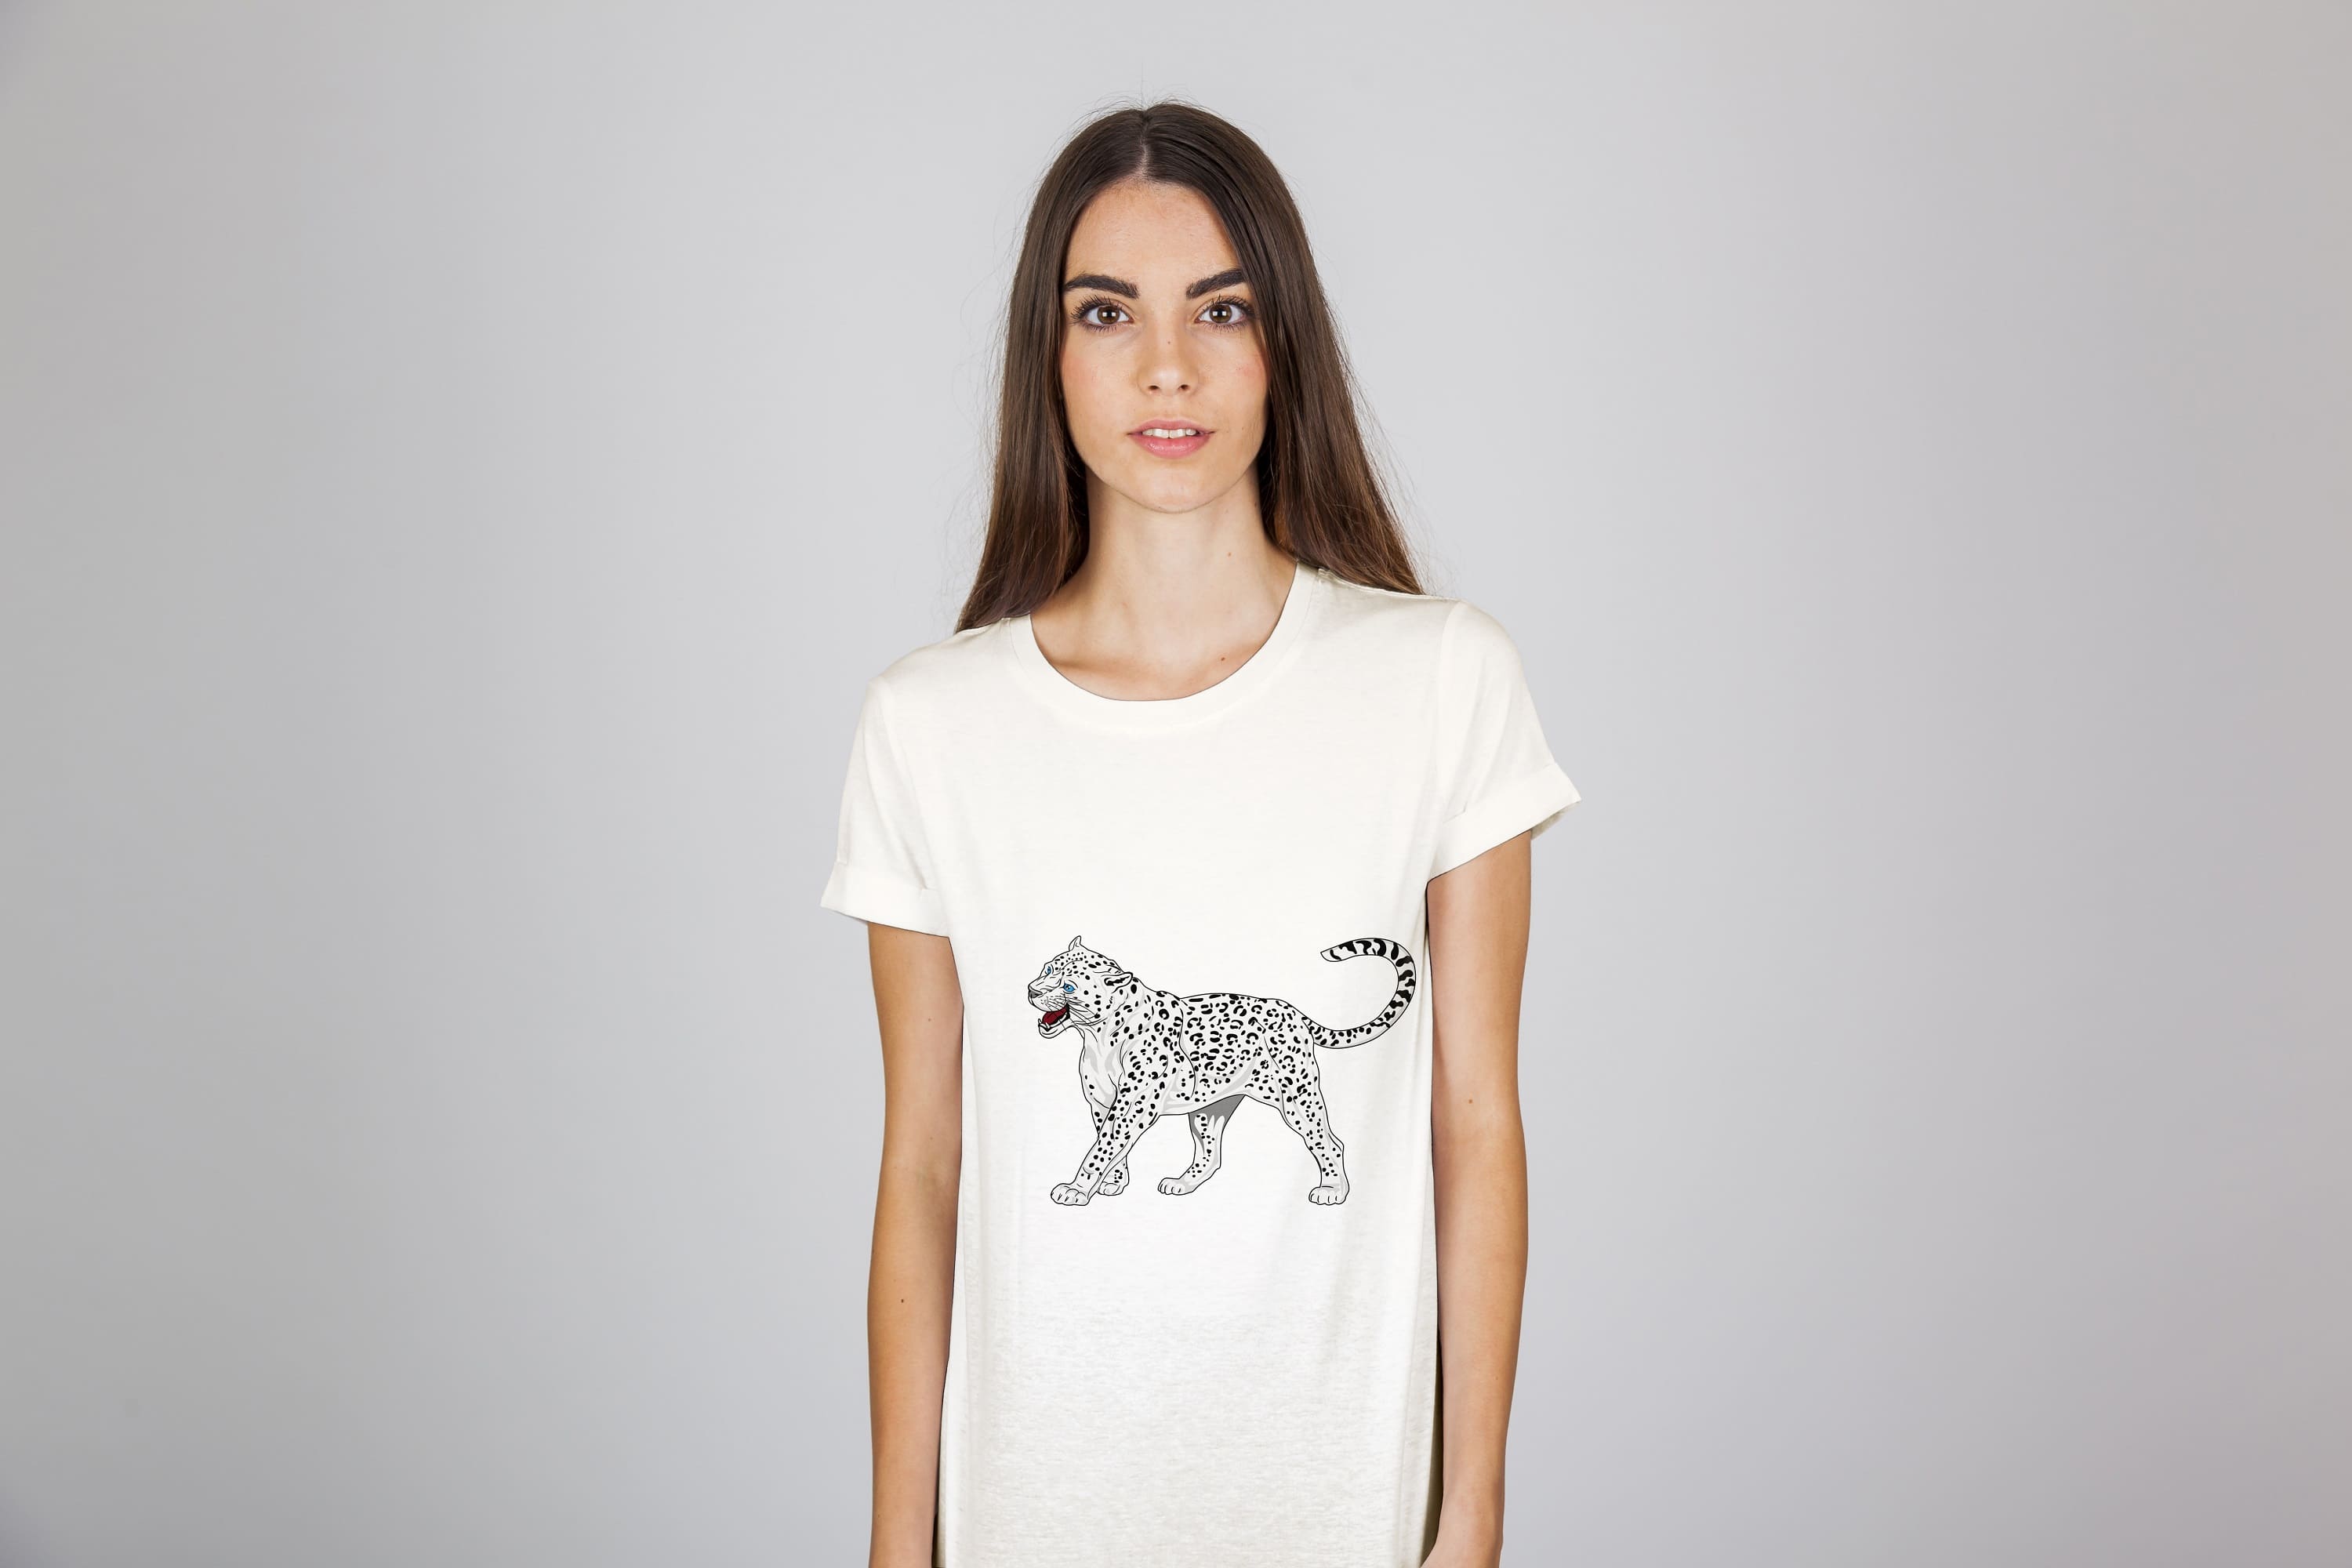 A snow leopard with a grin on a white t-shirt.